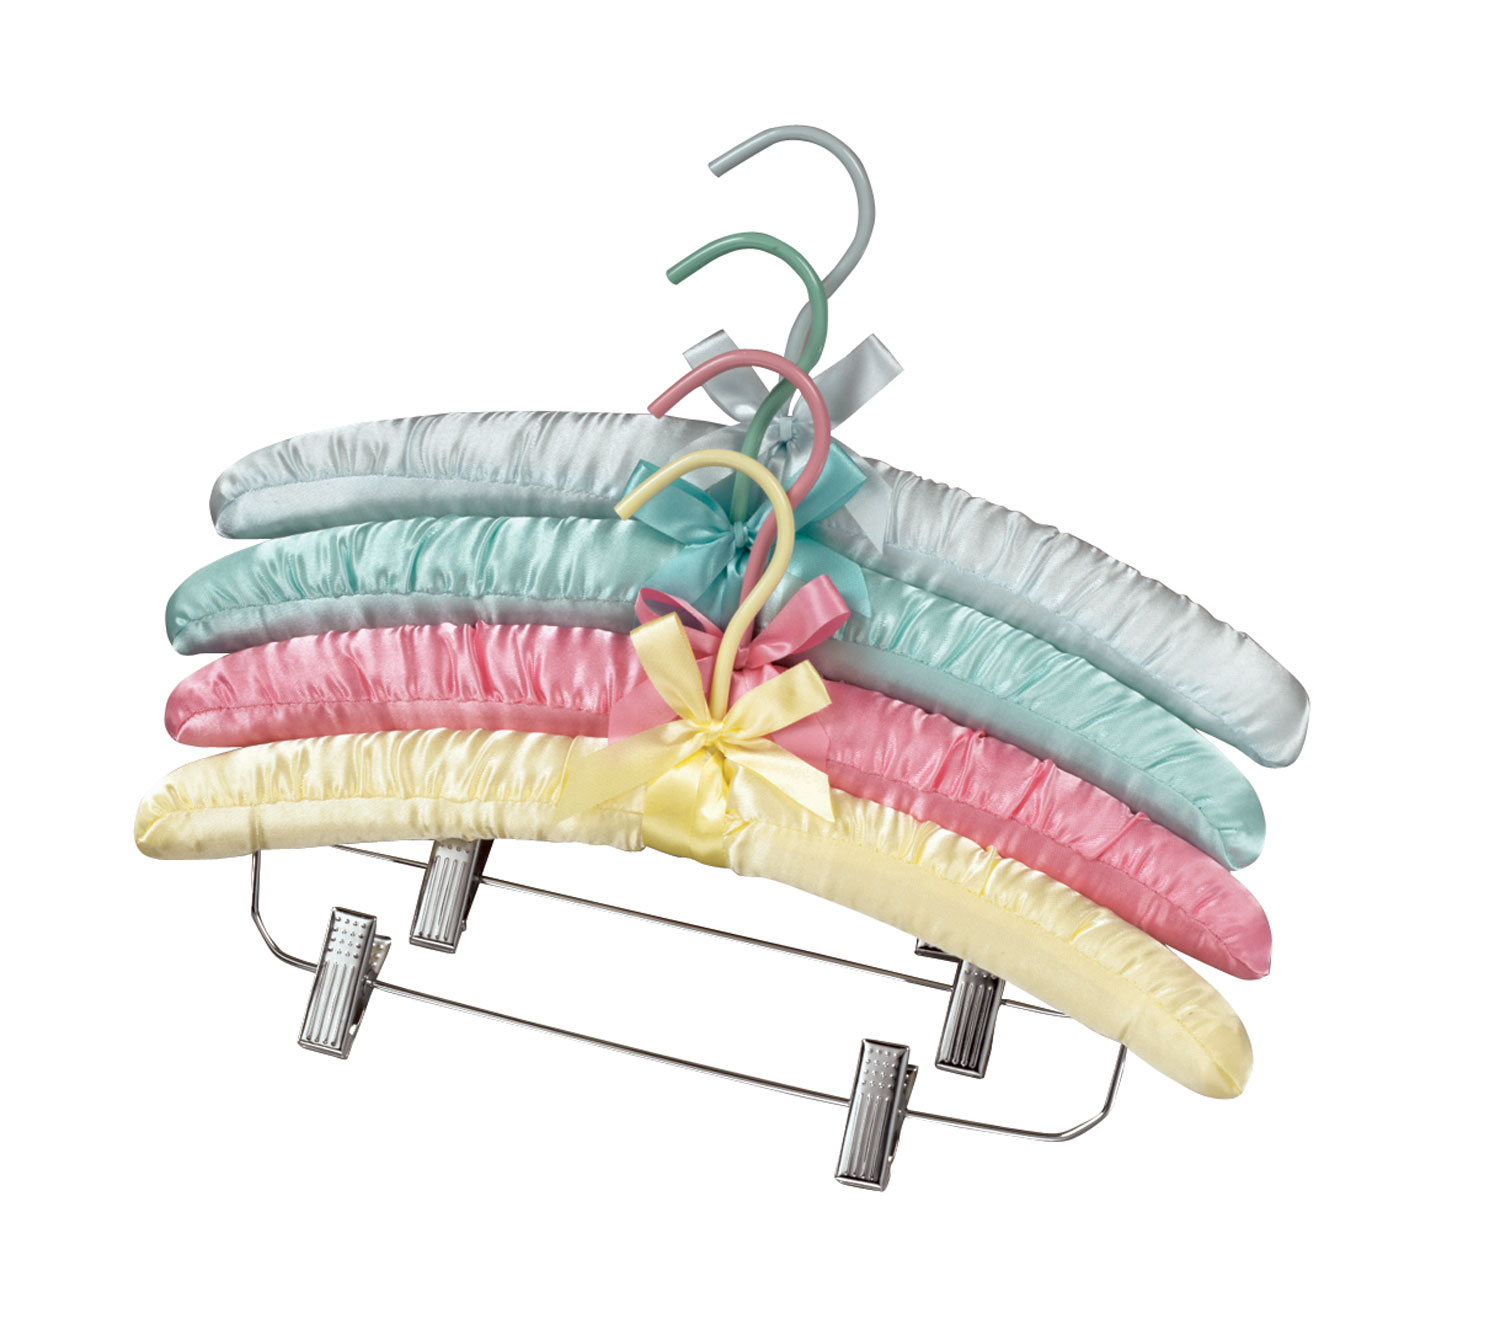 Satin Padded Hangers with Clips Set/4 - image 1 of 1